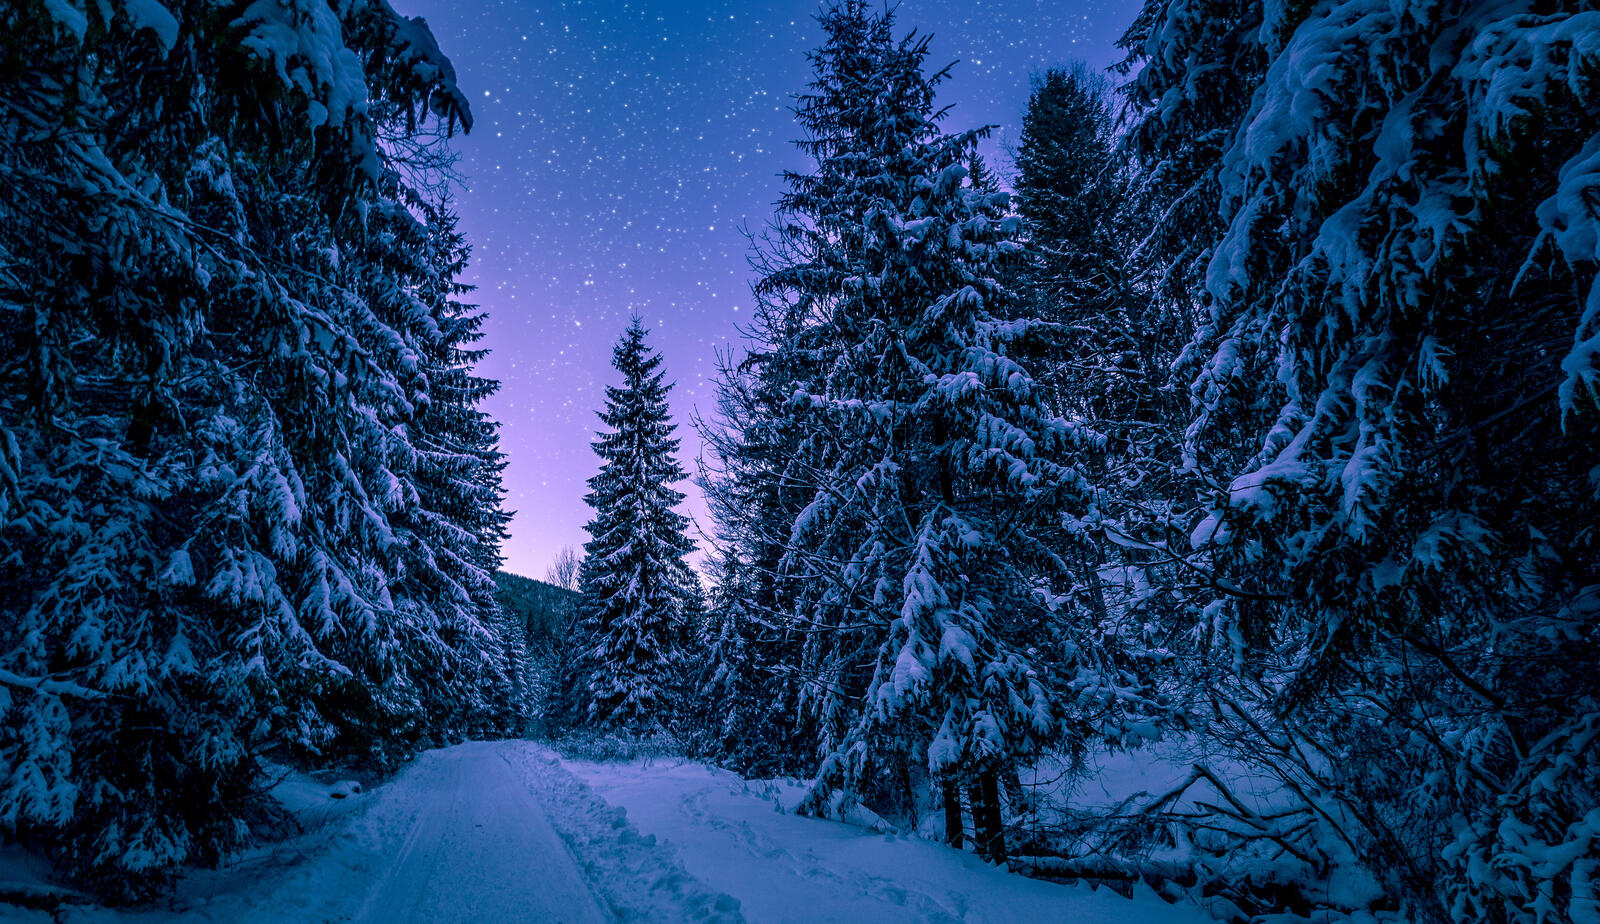 Free photo A snowy winter night among the trees